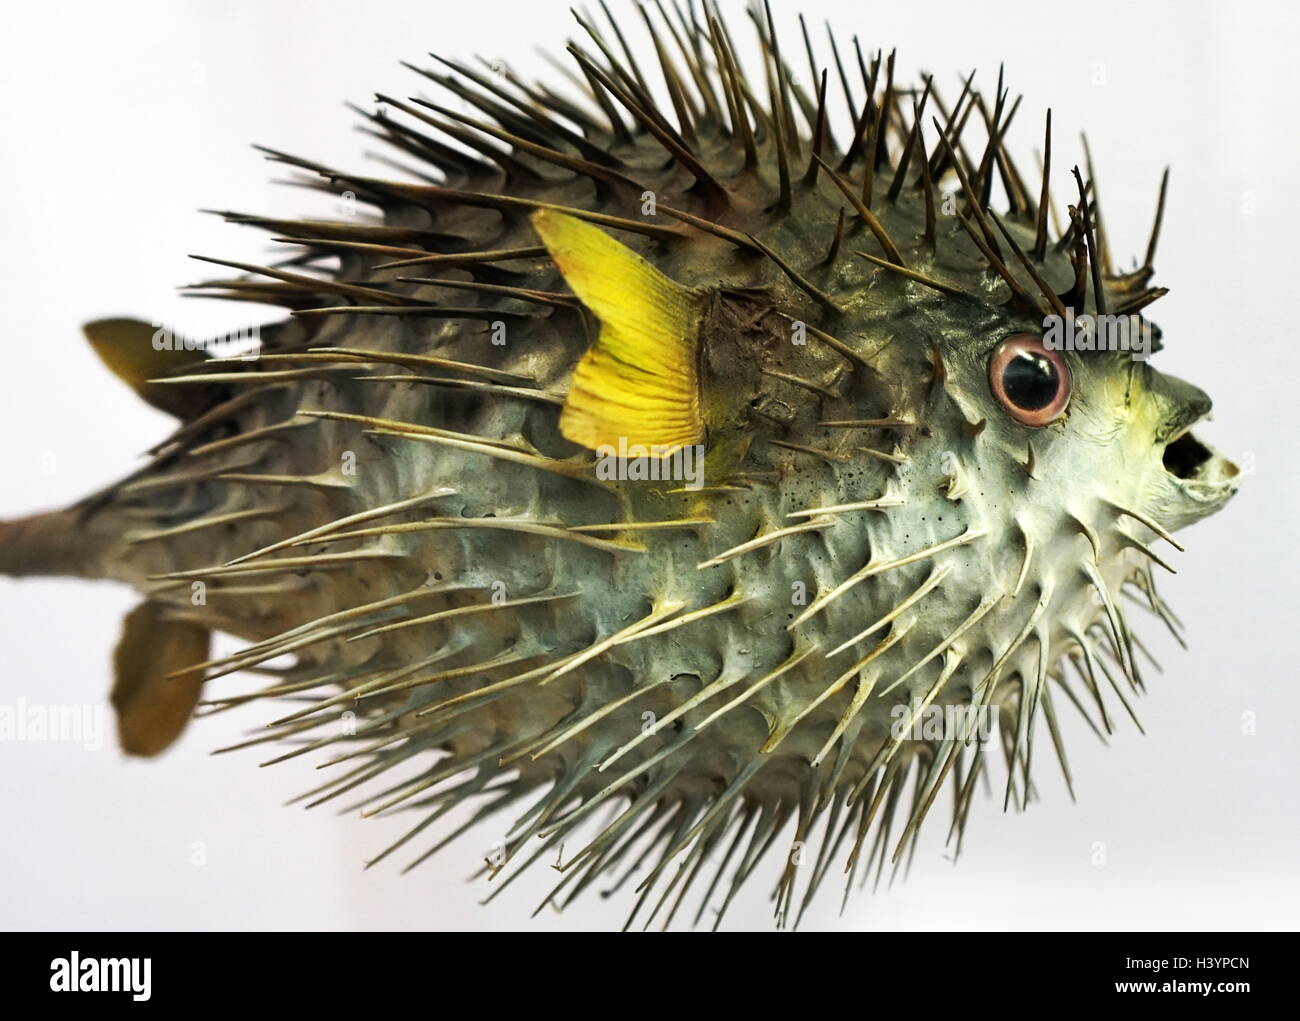 Long-spine porcupinefish (Diodon holocanthus) a species of marine